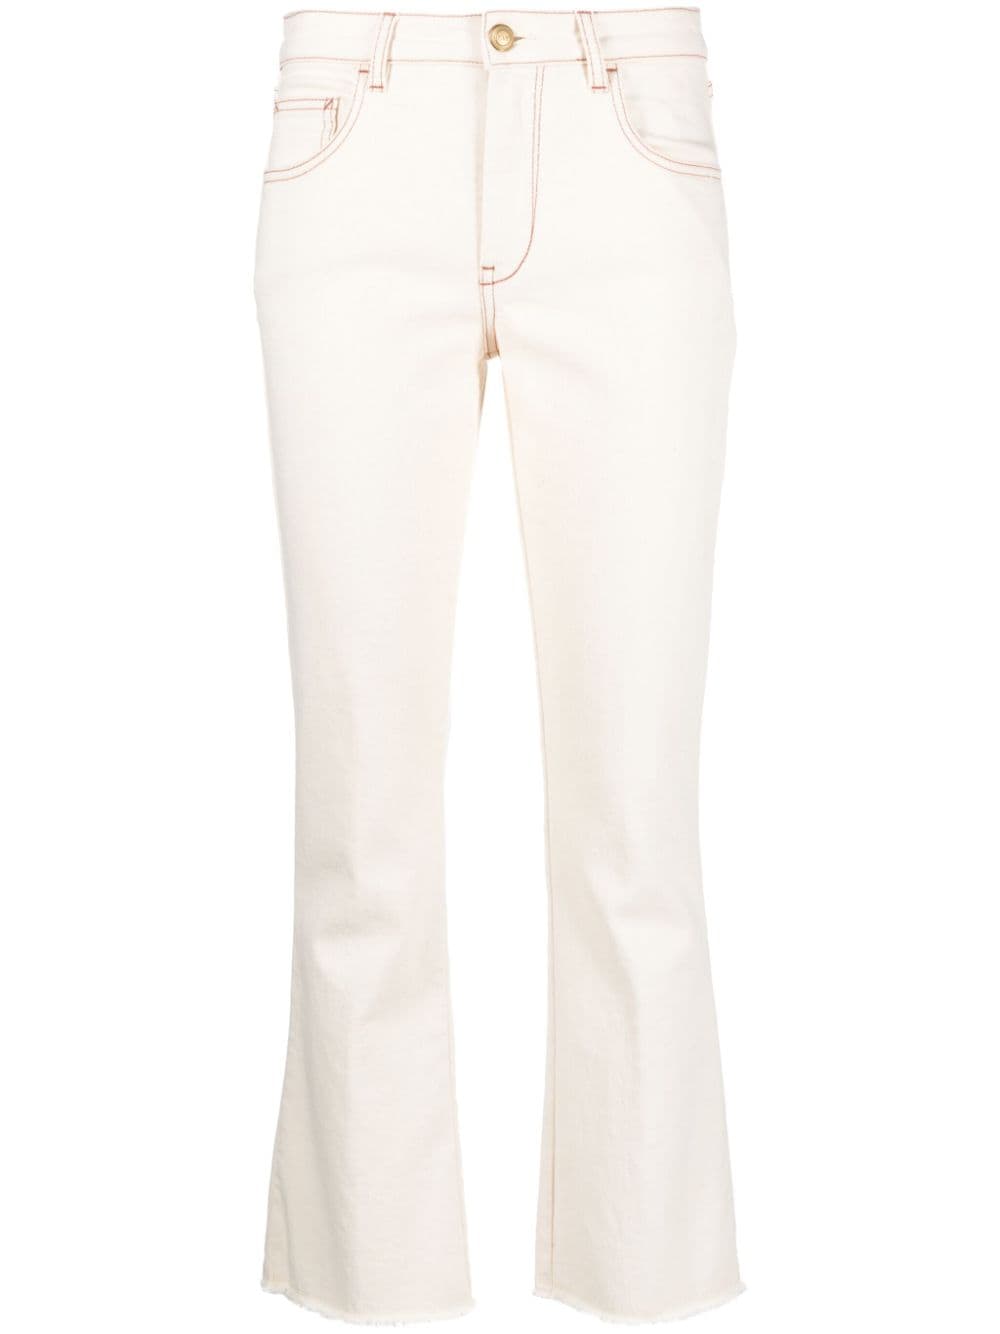 Fay Halbhohe Cropped-Jeans - Nude von Fay